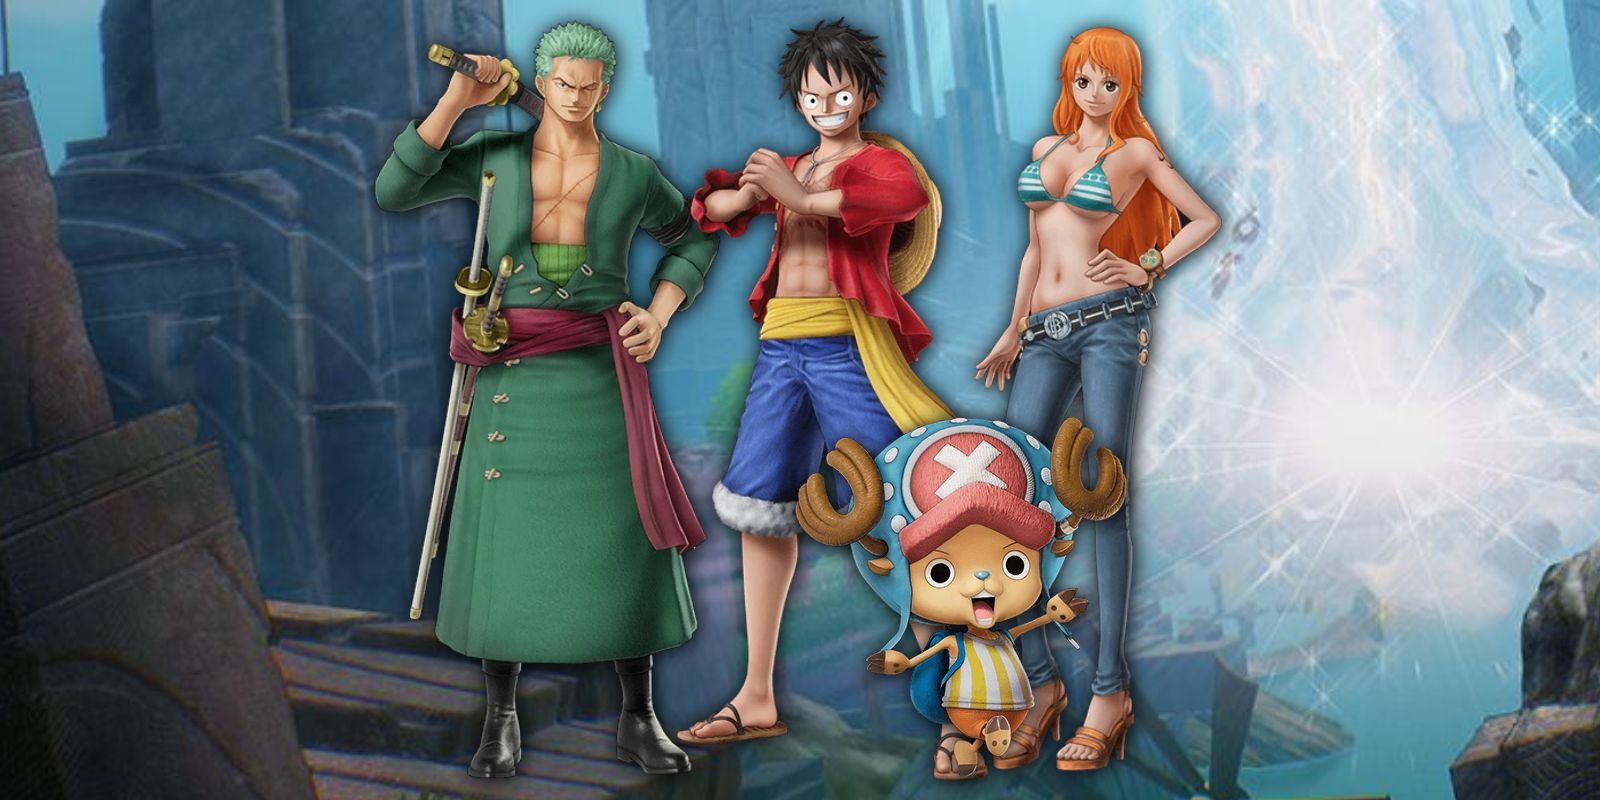 Manga One Piece Odyssey Every Playable Character Confirmed So Far 🍀